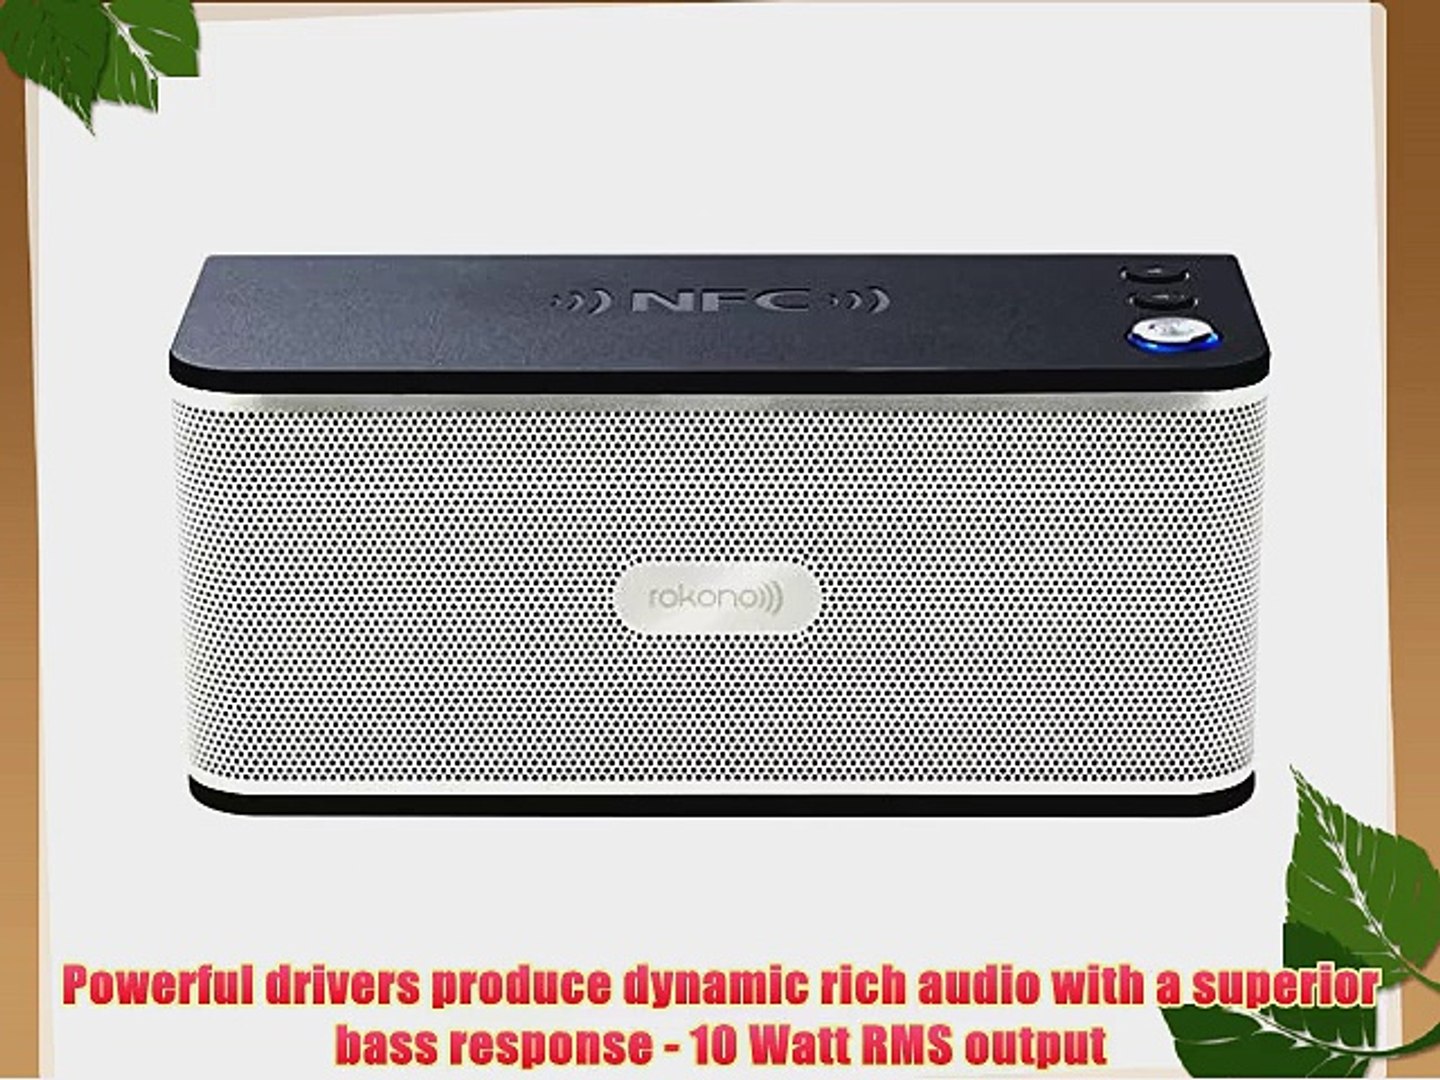 Rokono? (B20) BASS Portable Stereo Bluetooth Speaker for iPhone / iPad /  iPod / MP3 Player - video Dailymotion